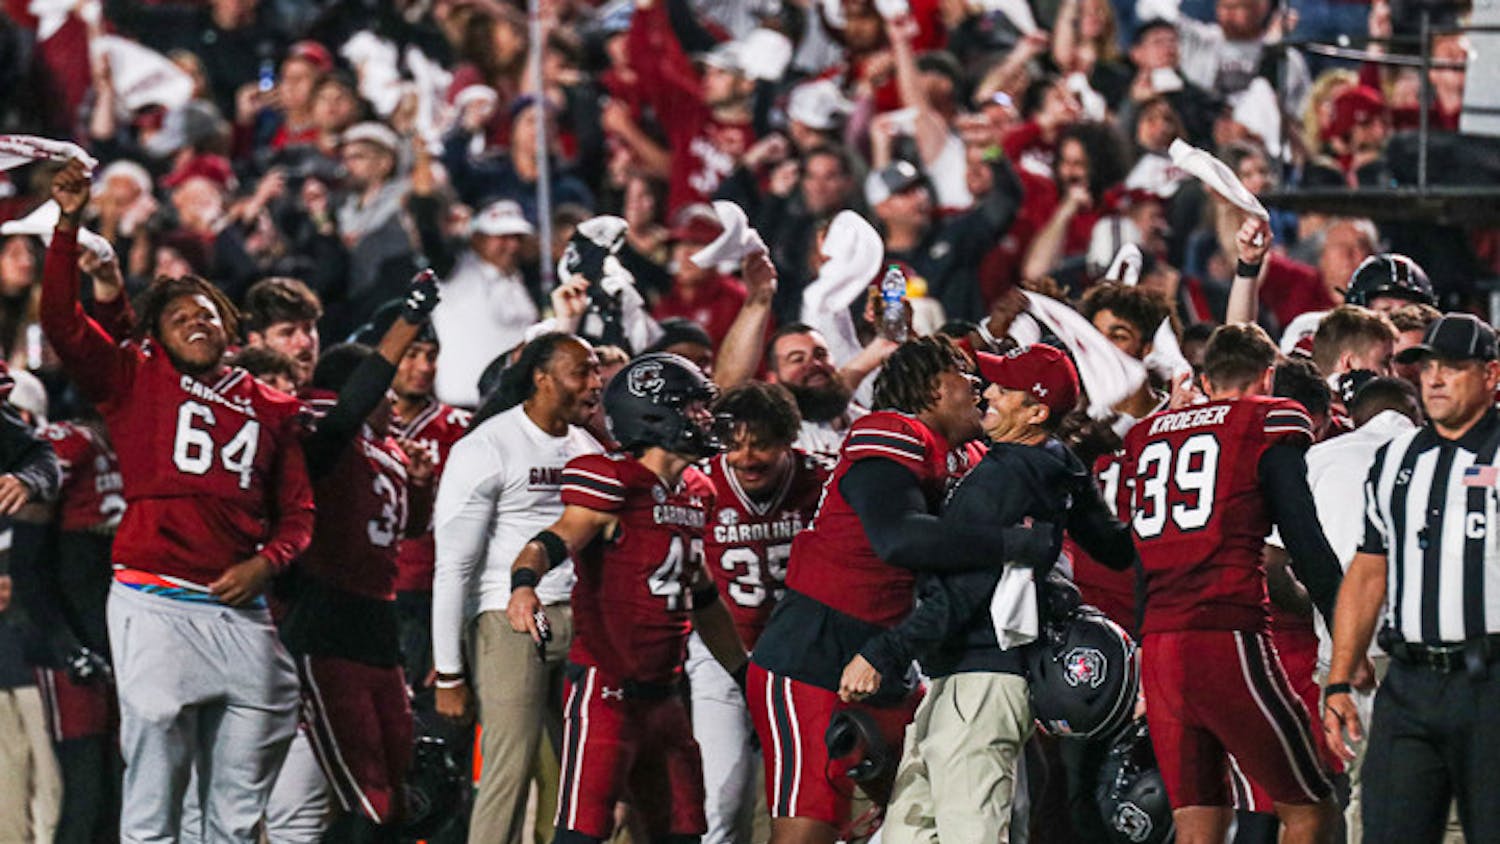 Head coach Shane Beamer gets a hug from freshman defensive lineman D’Andre Martin after the Gamecocks score against the Texas A&M Aggies at Williams-Brice Stadium on Oct. 23, 2022.